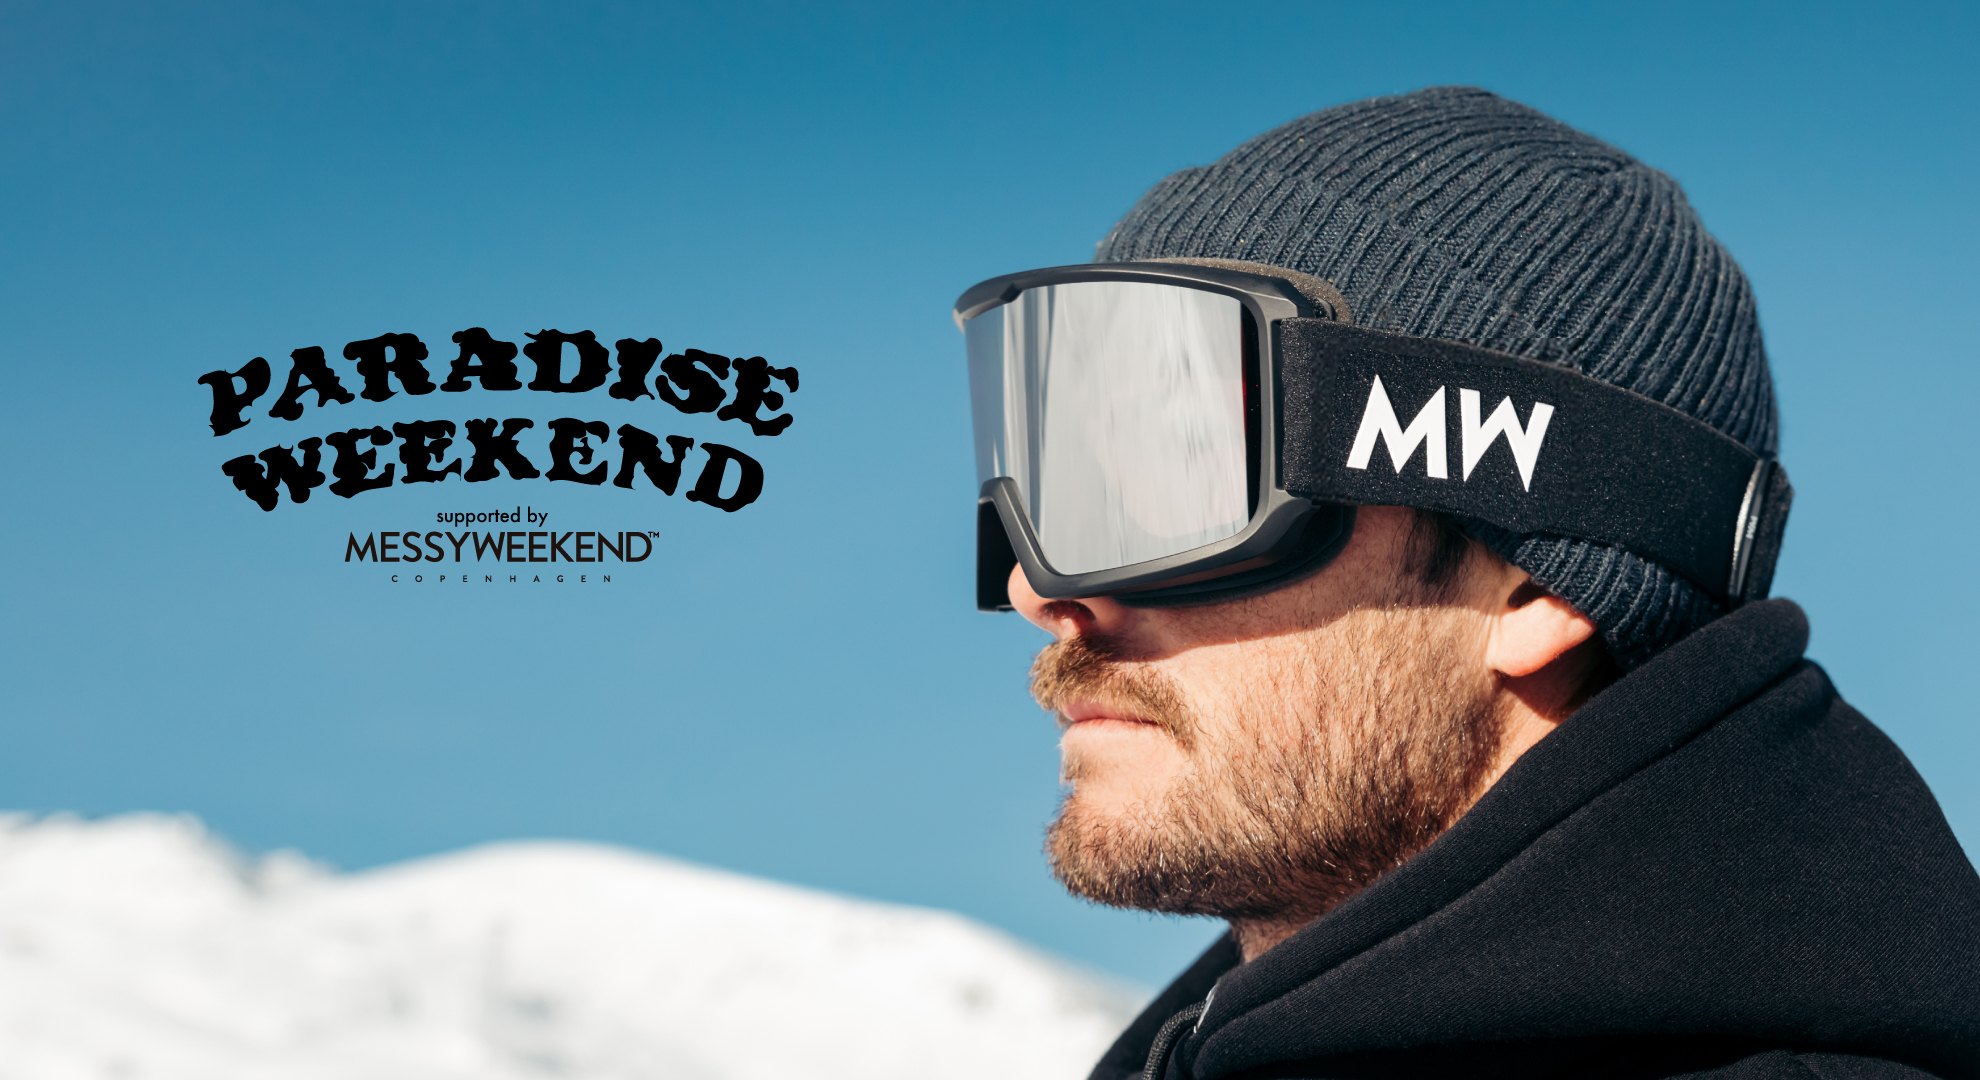 PARADISE WEEKEND supported by MESSYWEEKEND